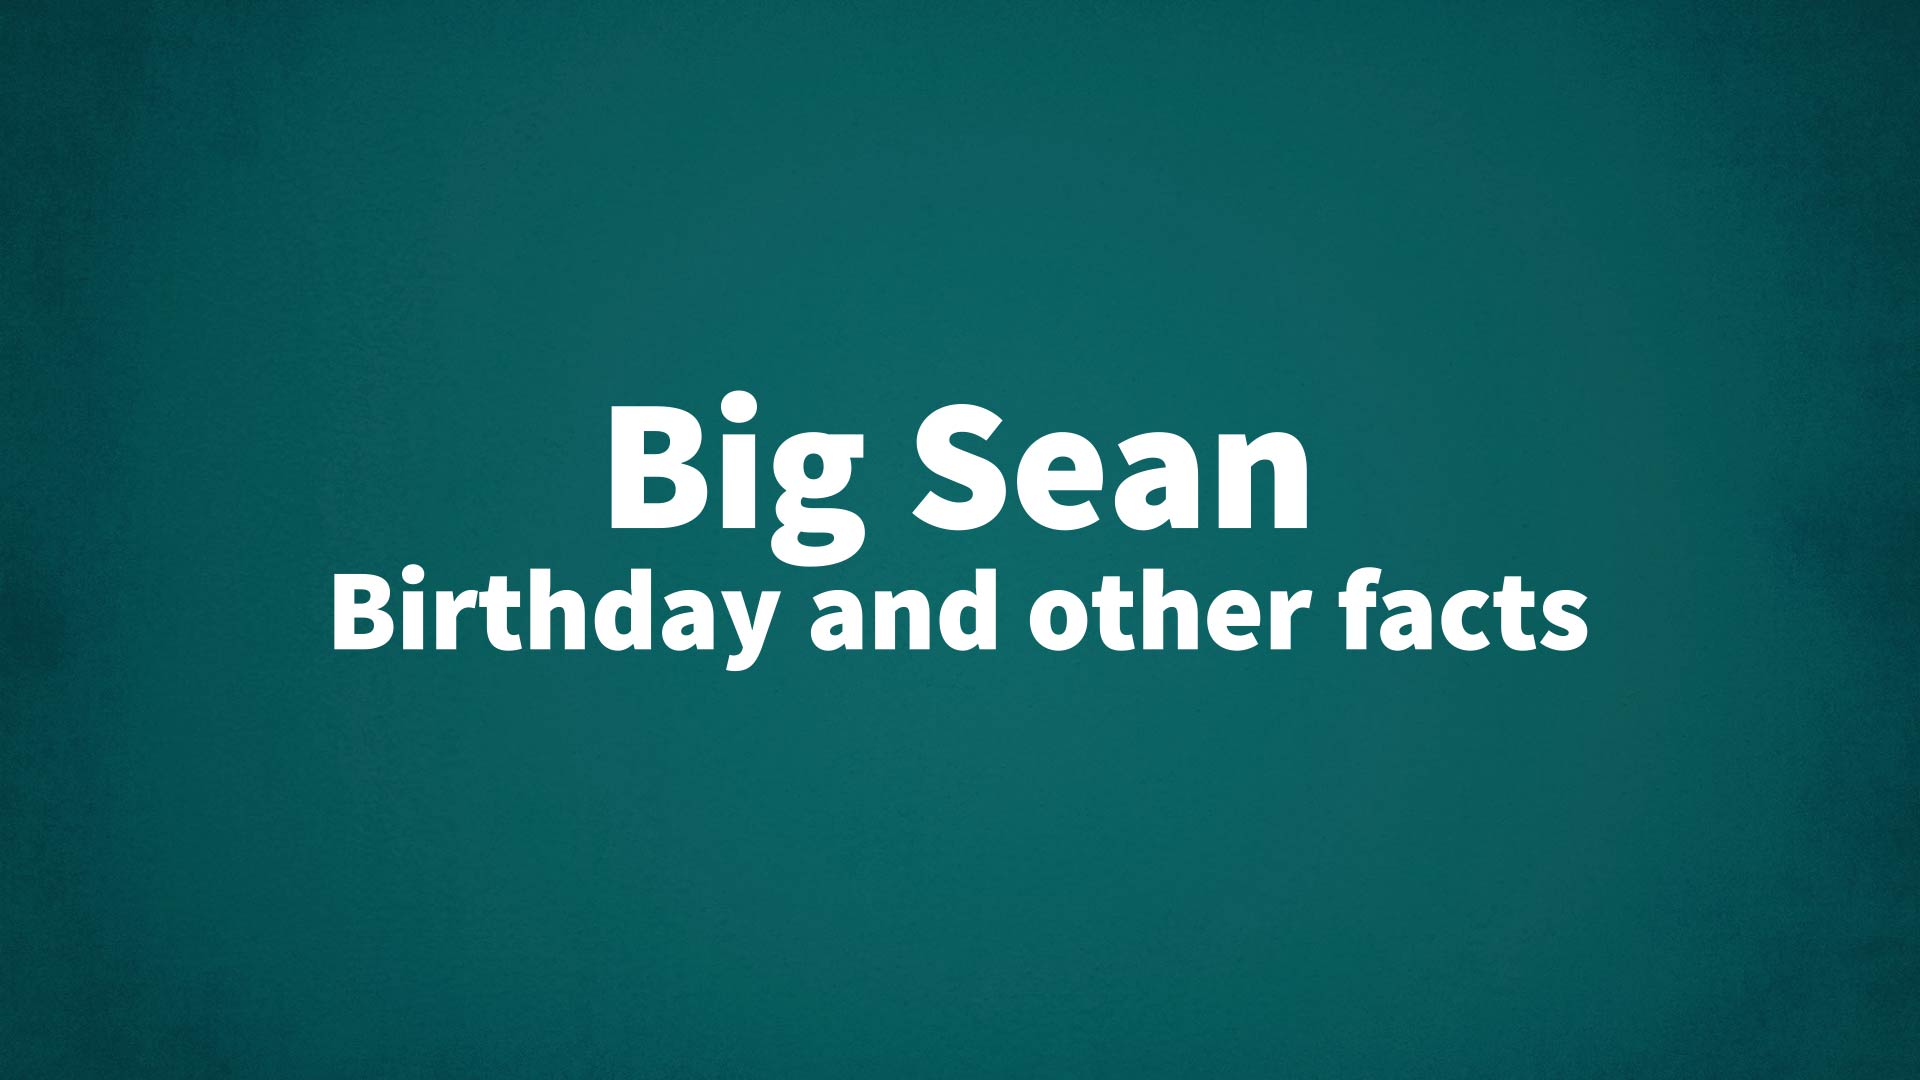 Big Sean - Birthday and other facts